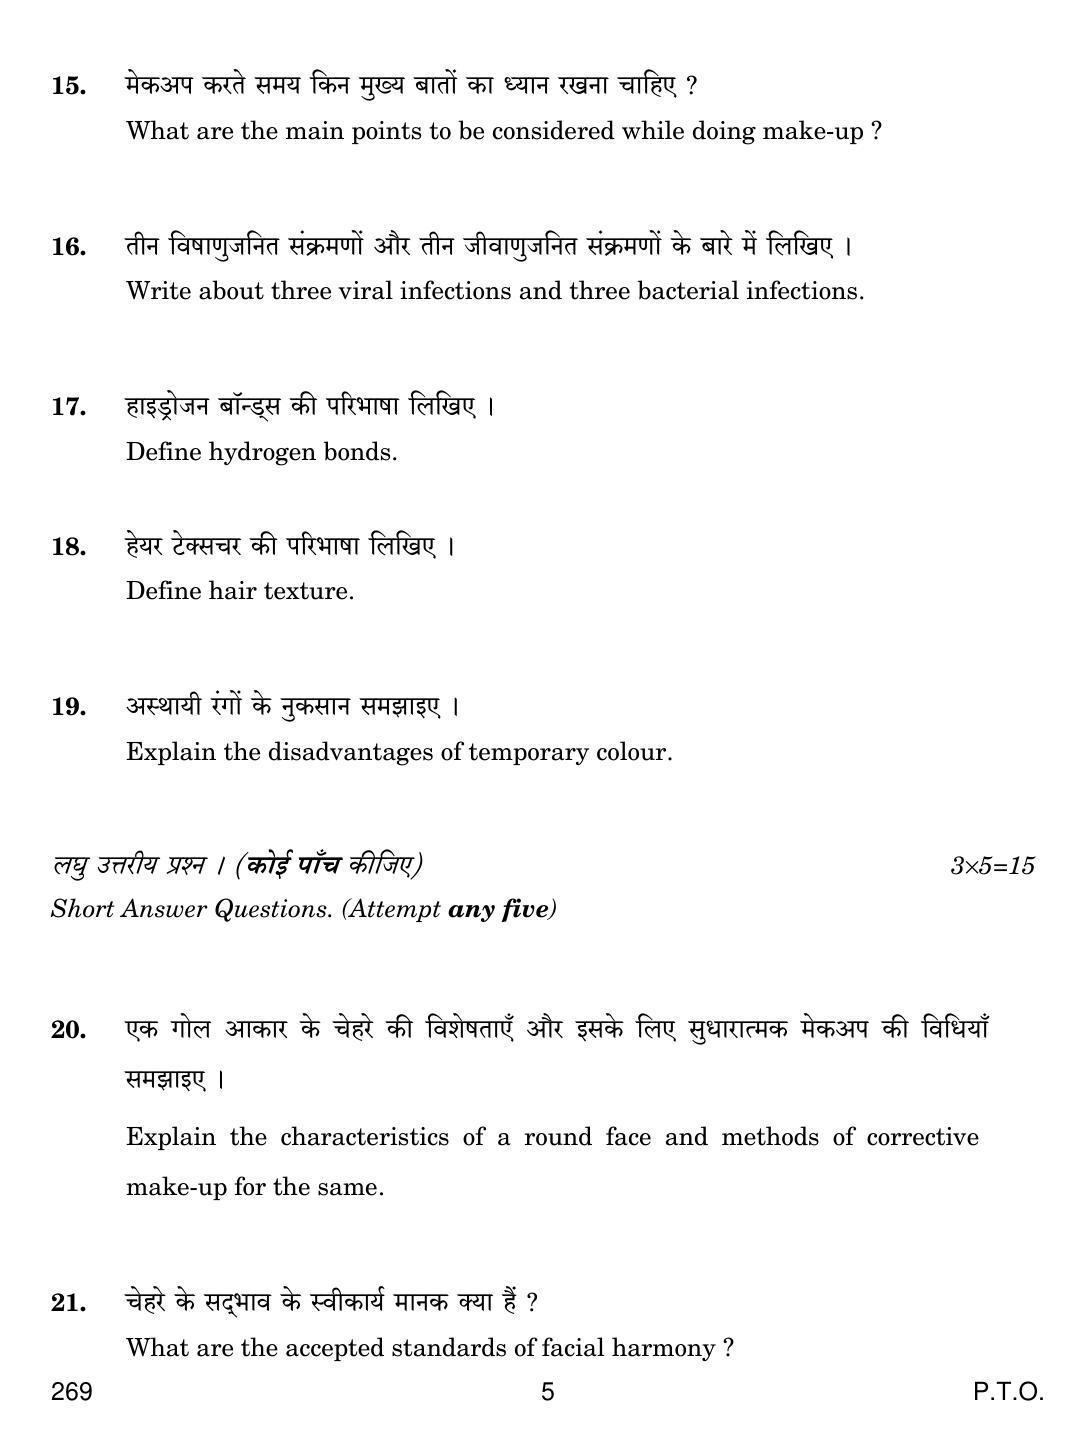 CBSE Class 12 269 BEAUTY AND HAIR 2019 Compartment Question Paper - Page 5